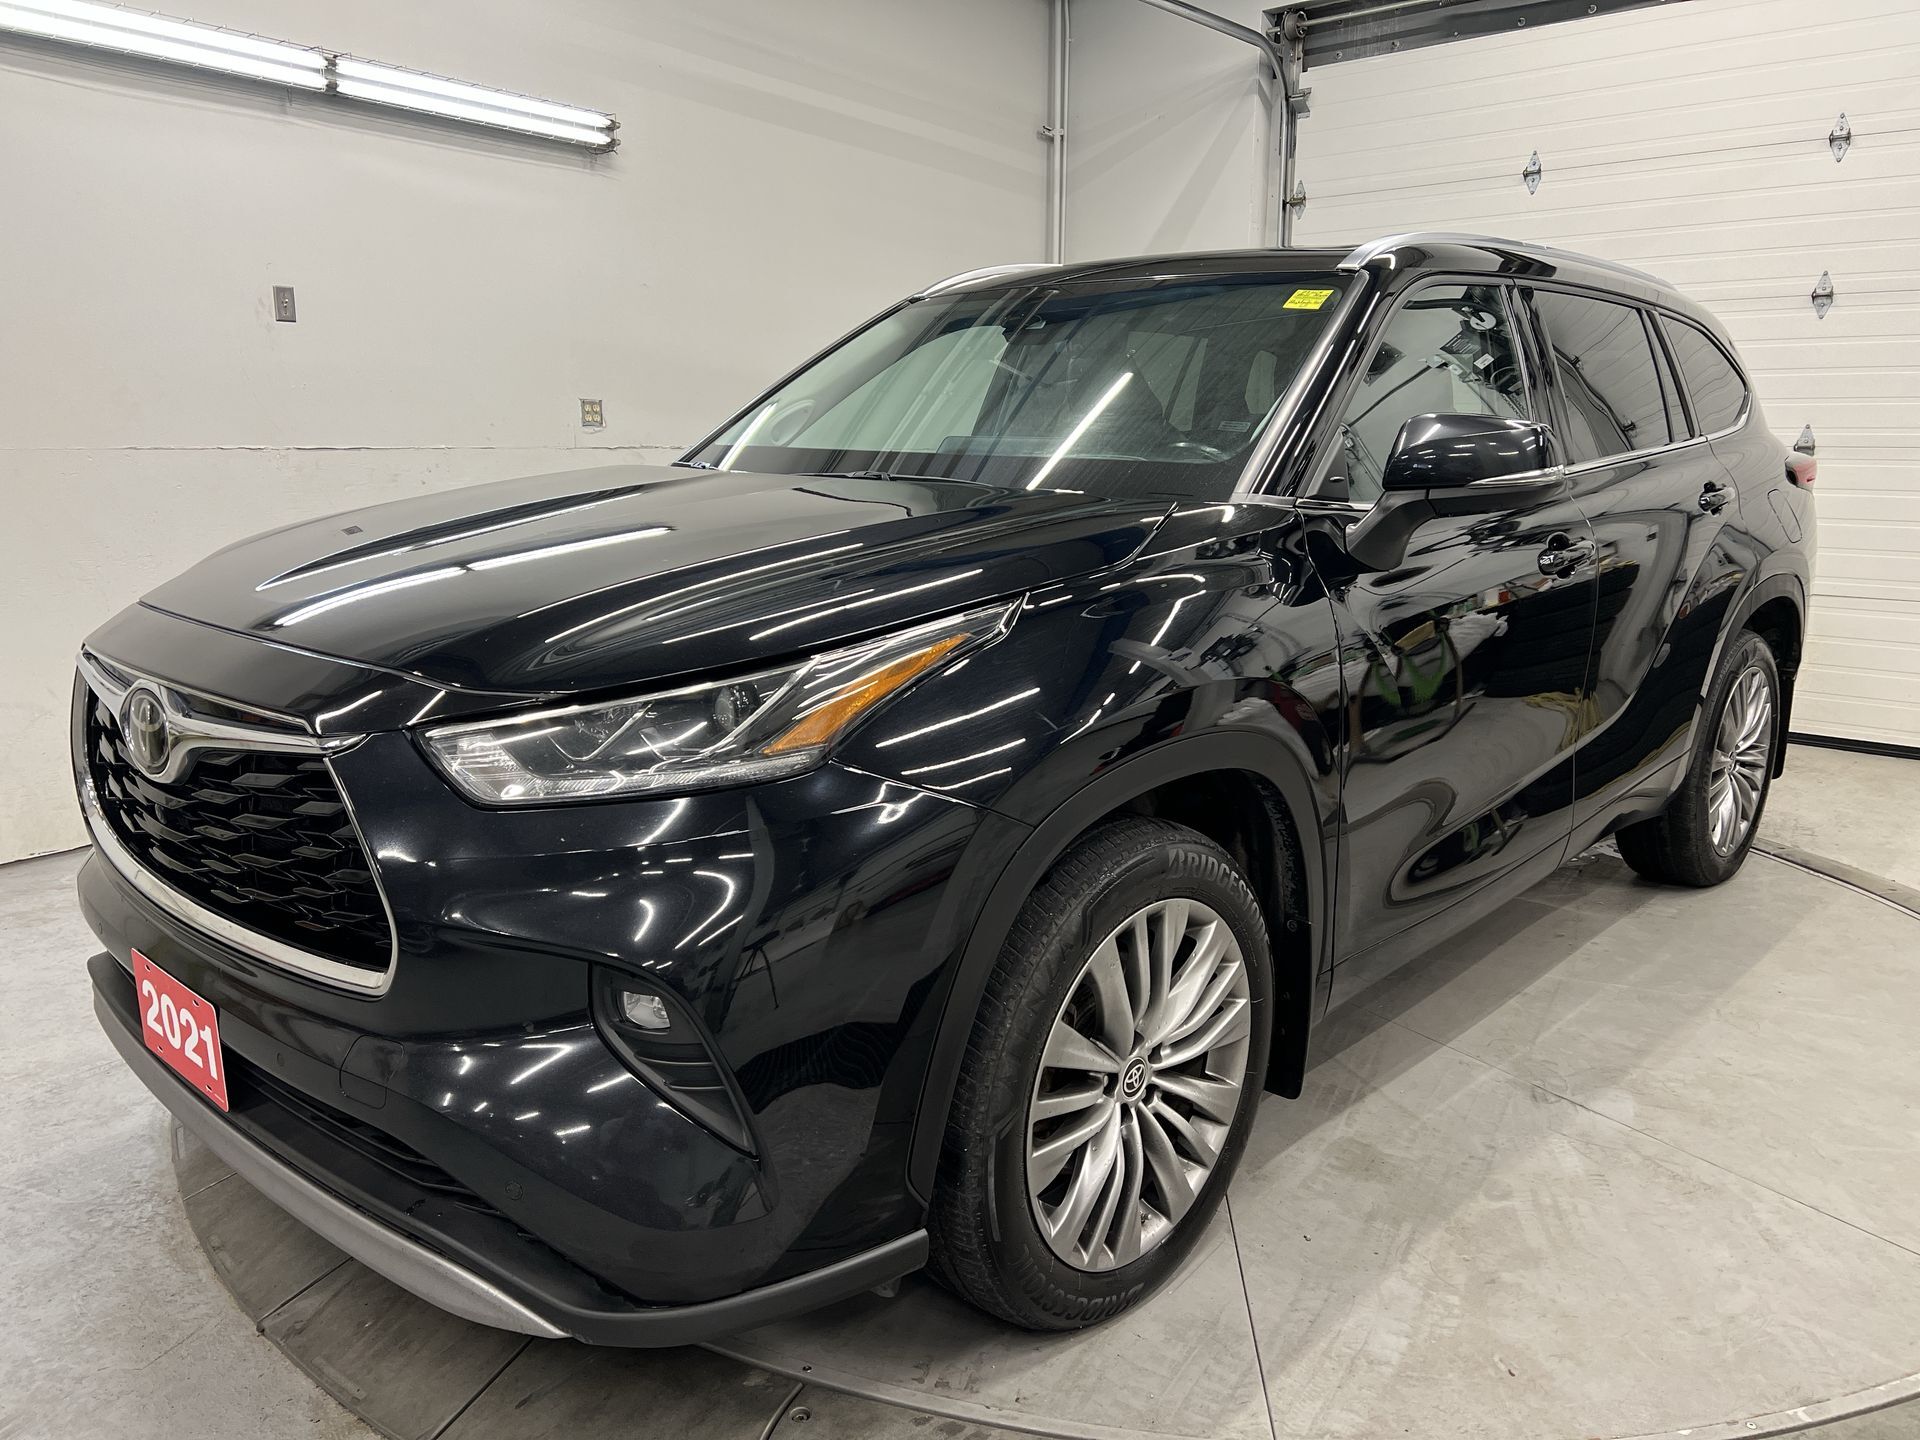 2021 Toyota Highlander PLATINUM AWD | 7 PASS | PANO ROOF | COOLED LEATHER